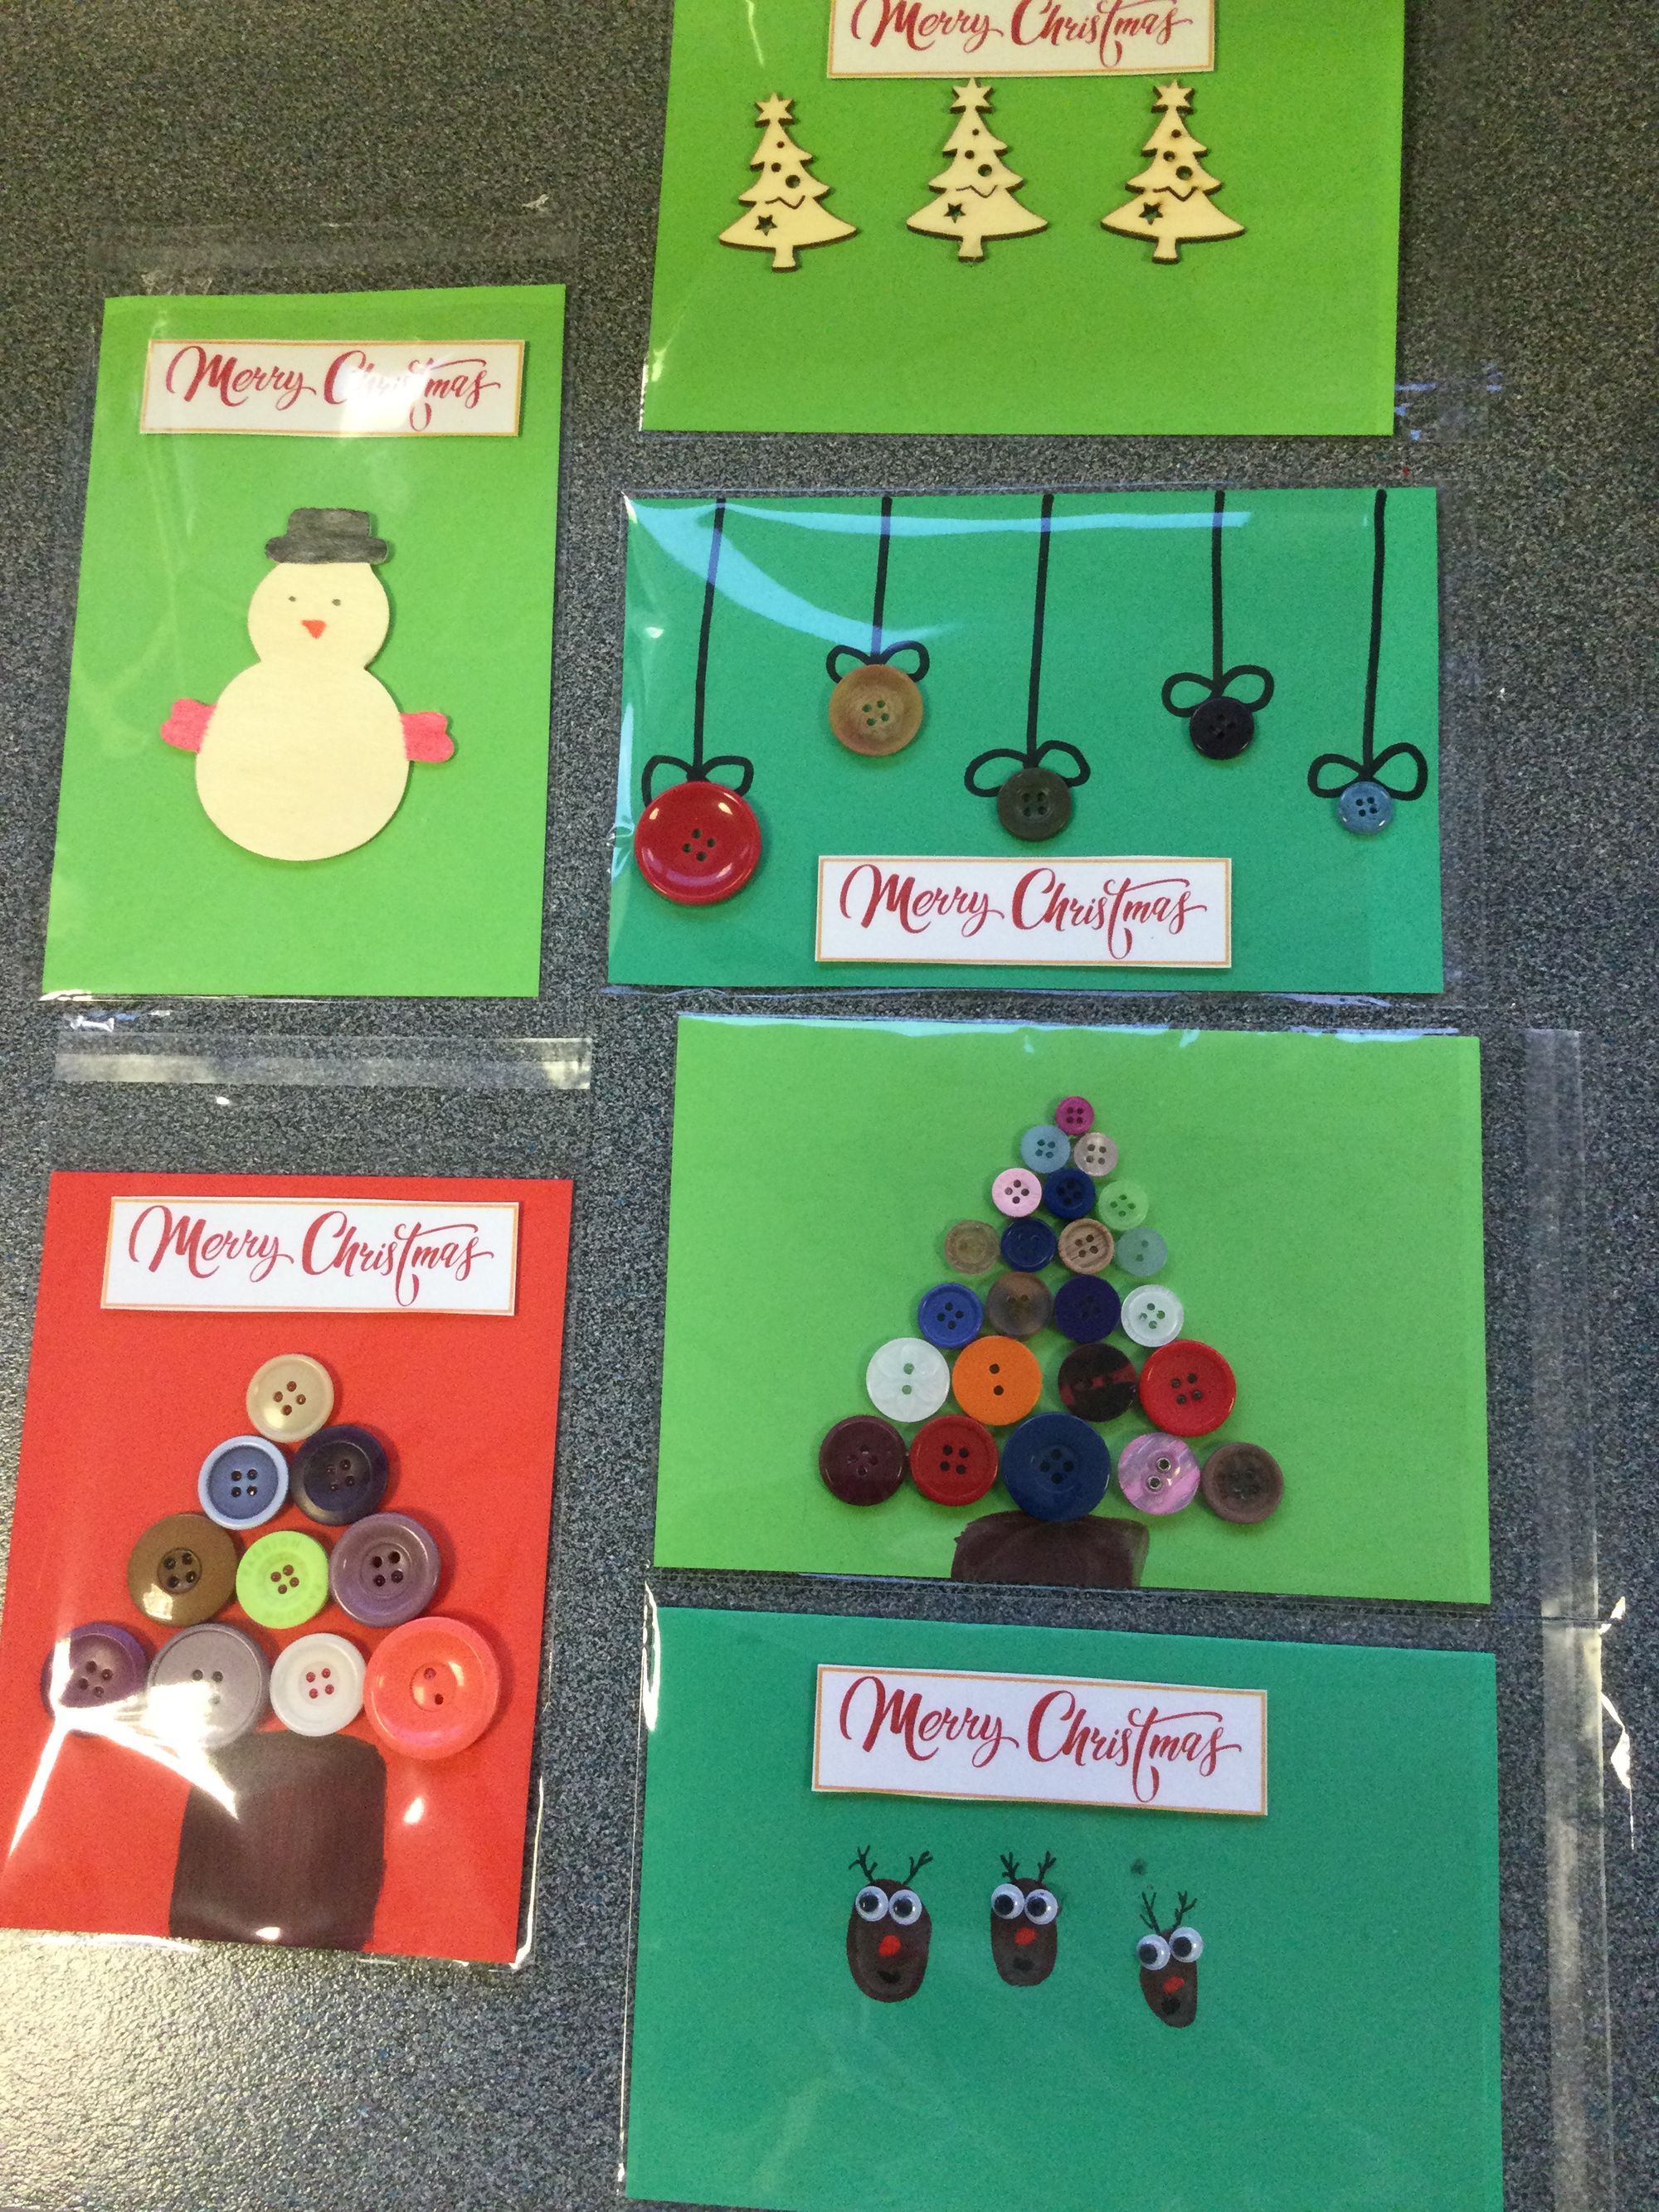 7C have been busy getting ready for our Christmas fete